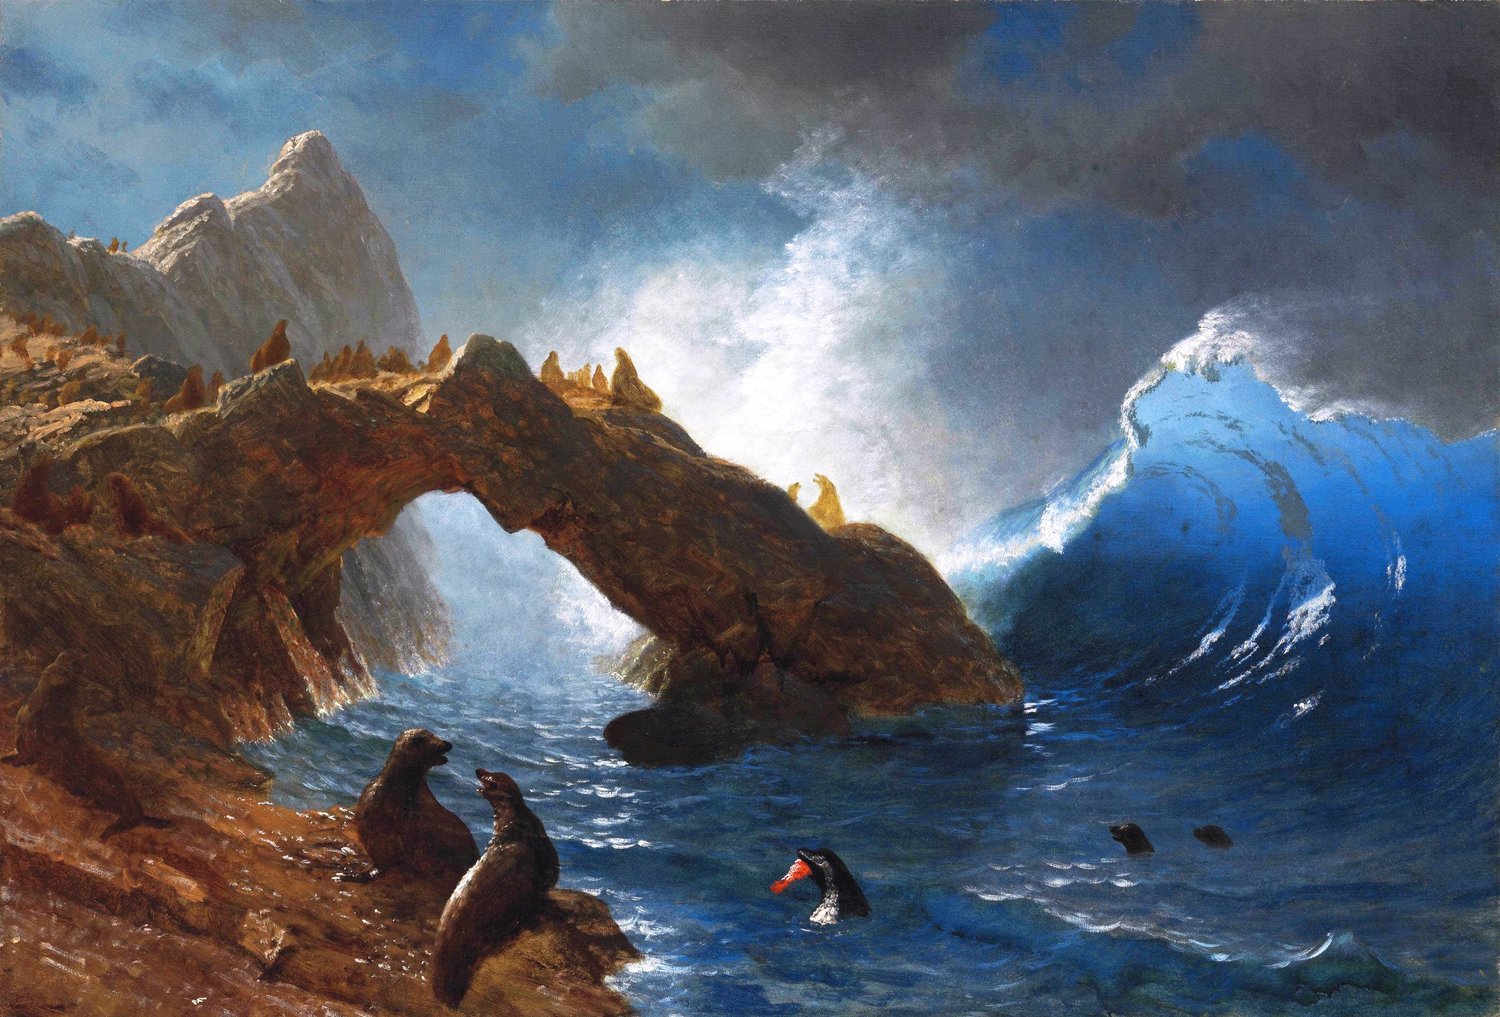 Painting the outdoors isn't just about peaceful imagery. Consider Albert Bierstadt's "Seals on the Rocks" from 1873.